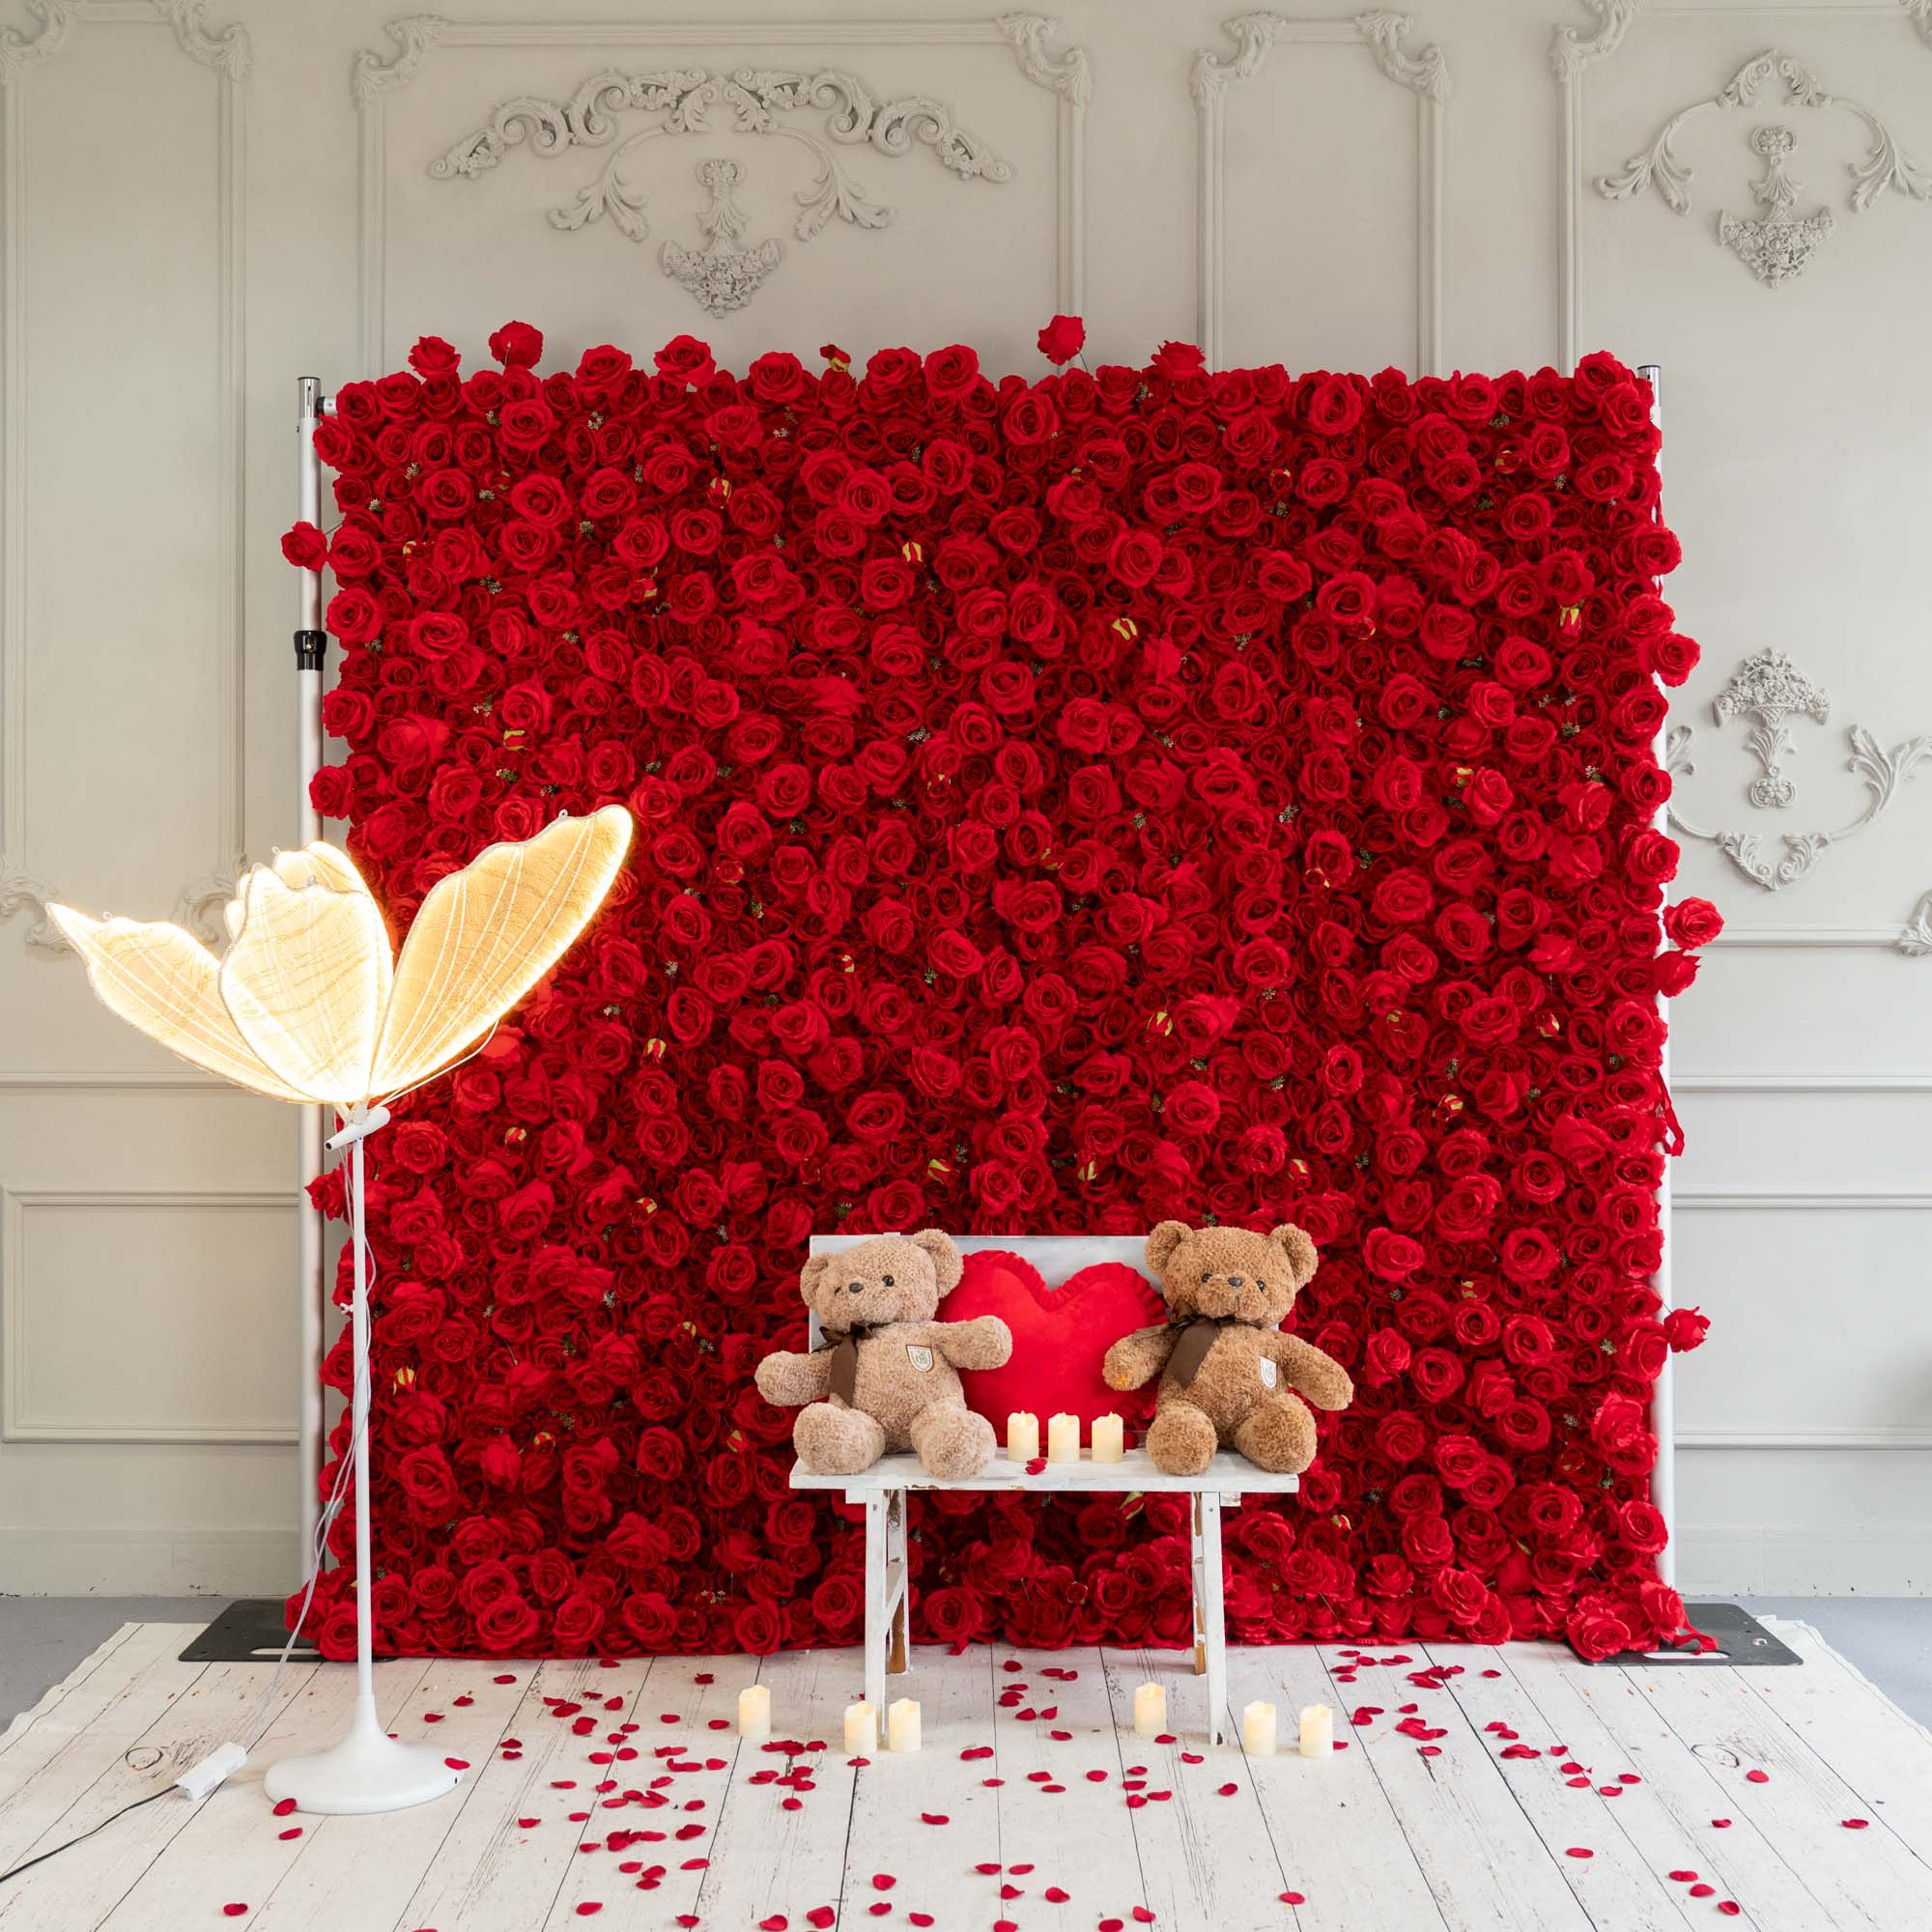 Flower Wall Bright Red Roses Fabric Rolling Up Curtain Floral Backdrop Wedding Party Proposal Decor